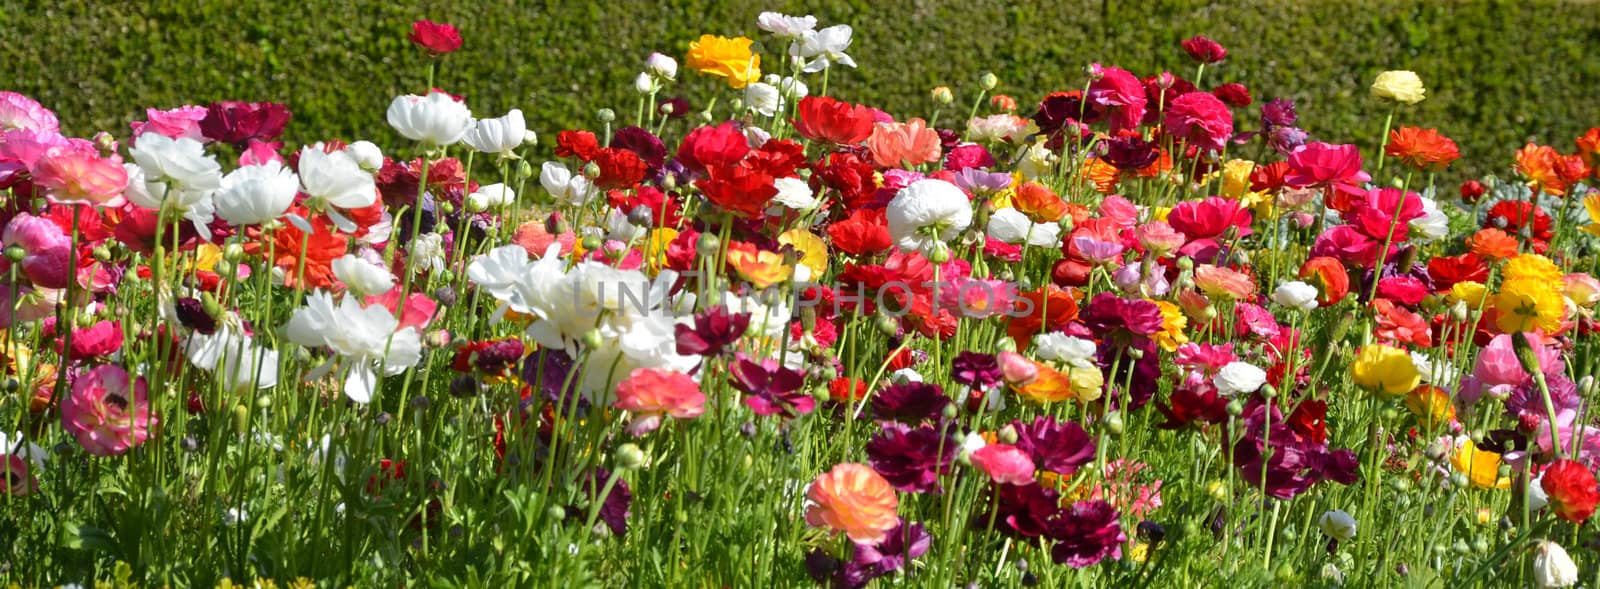 Beautiful colorful spring flowers in the grass